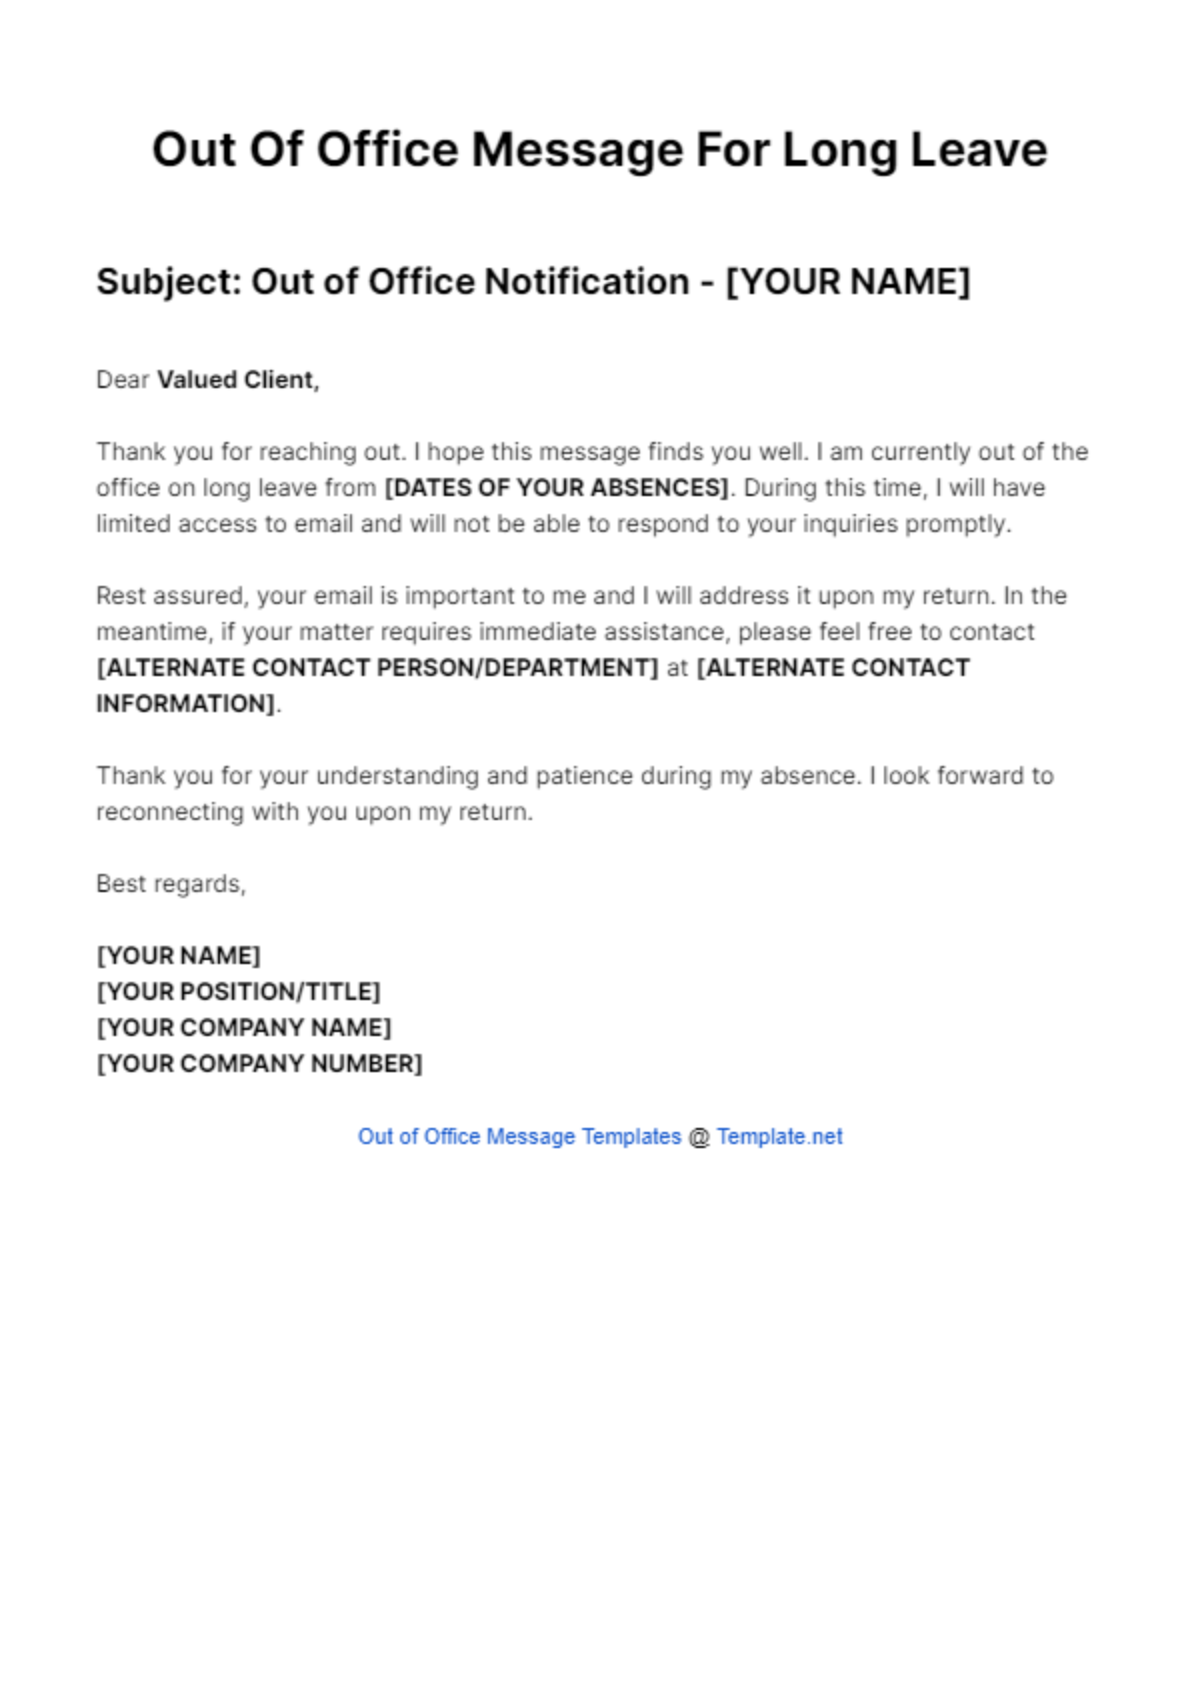 Out Of Office Message For Long Leave Template